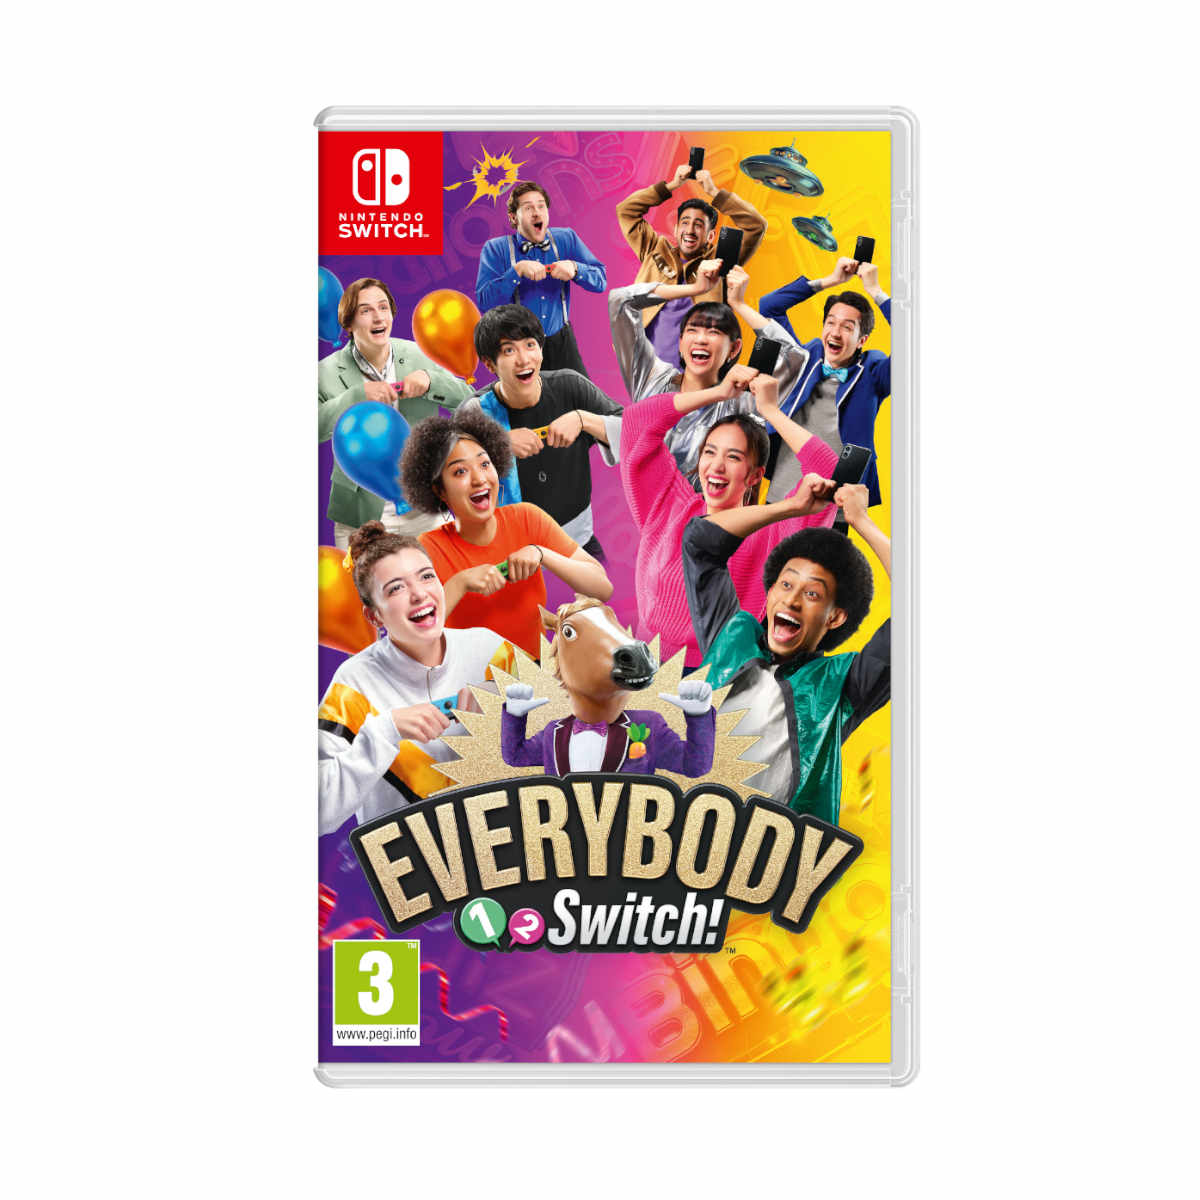 Grab your phones and join the fun in Everybody 1-2 Switch